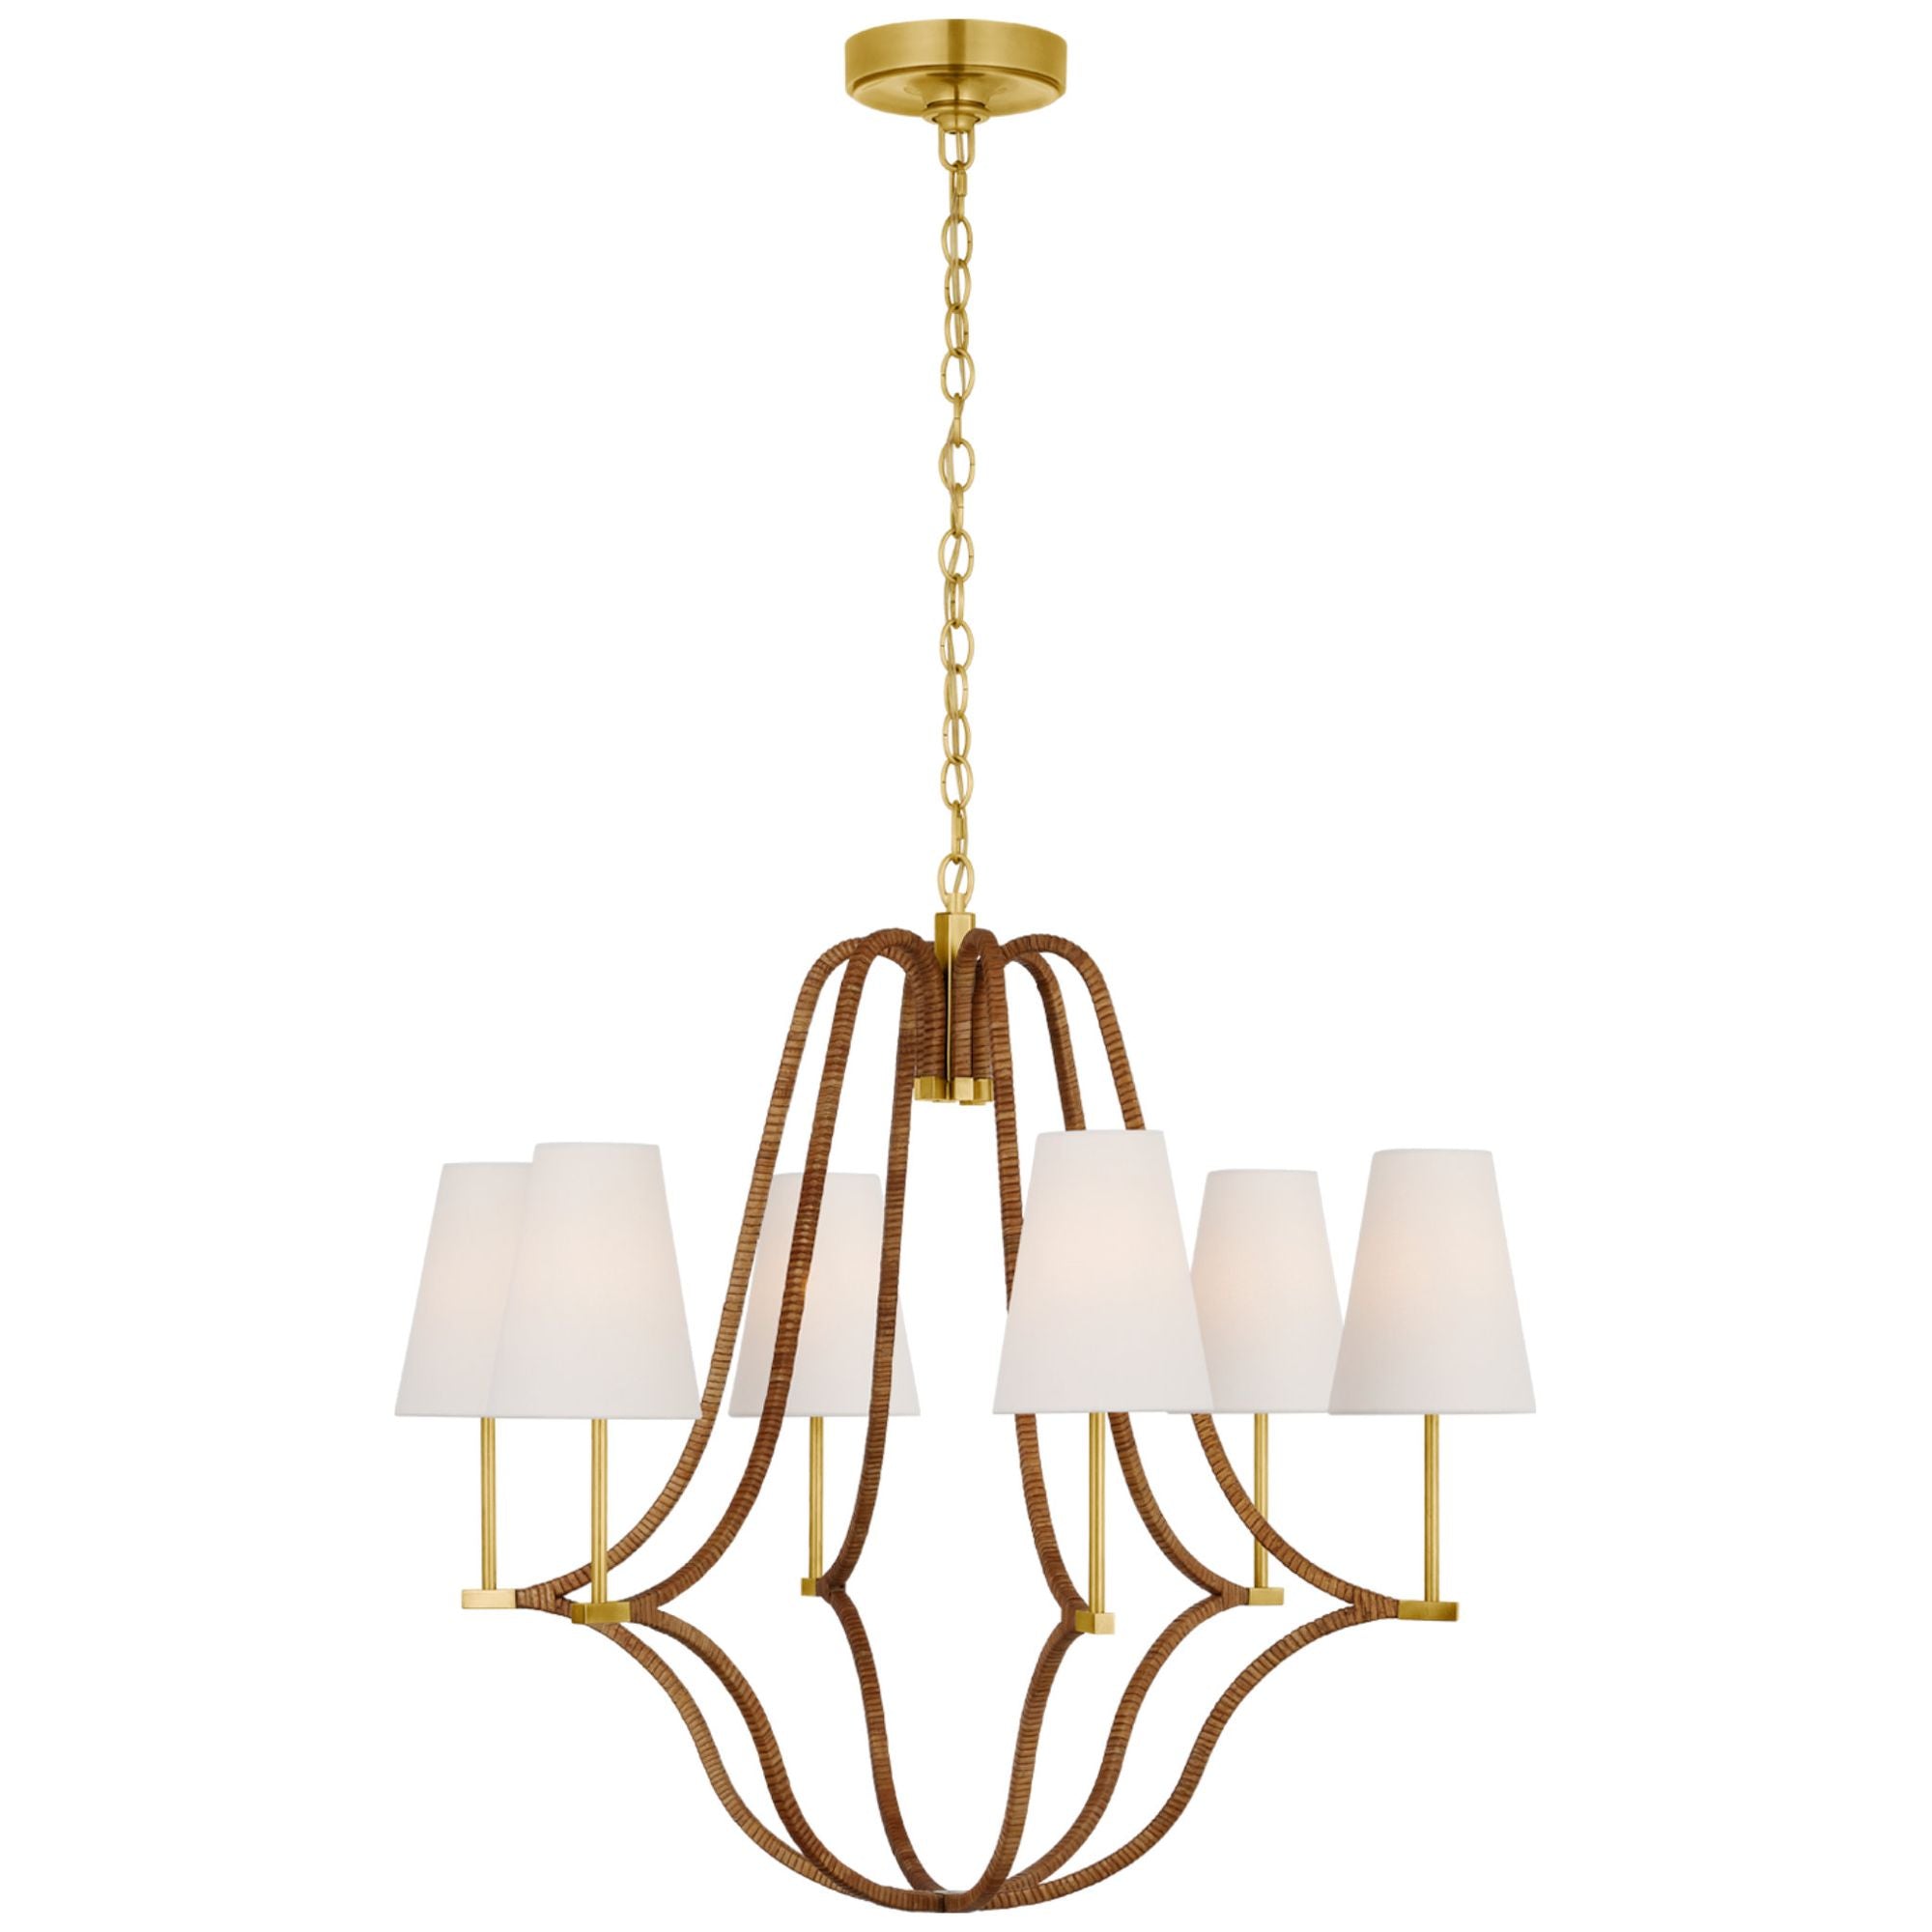 Chapman & Myers Biscayne Large Wrapped Chandelier in Antique-Burnished Brass and Natural Rattan with Linen Shades